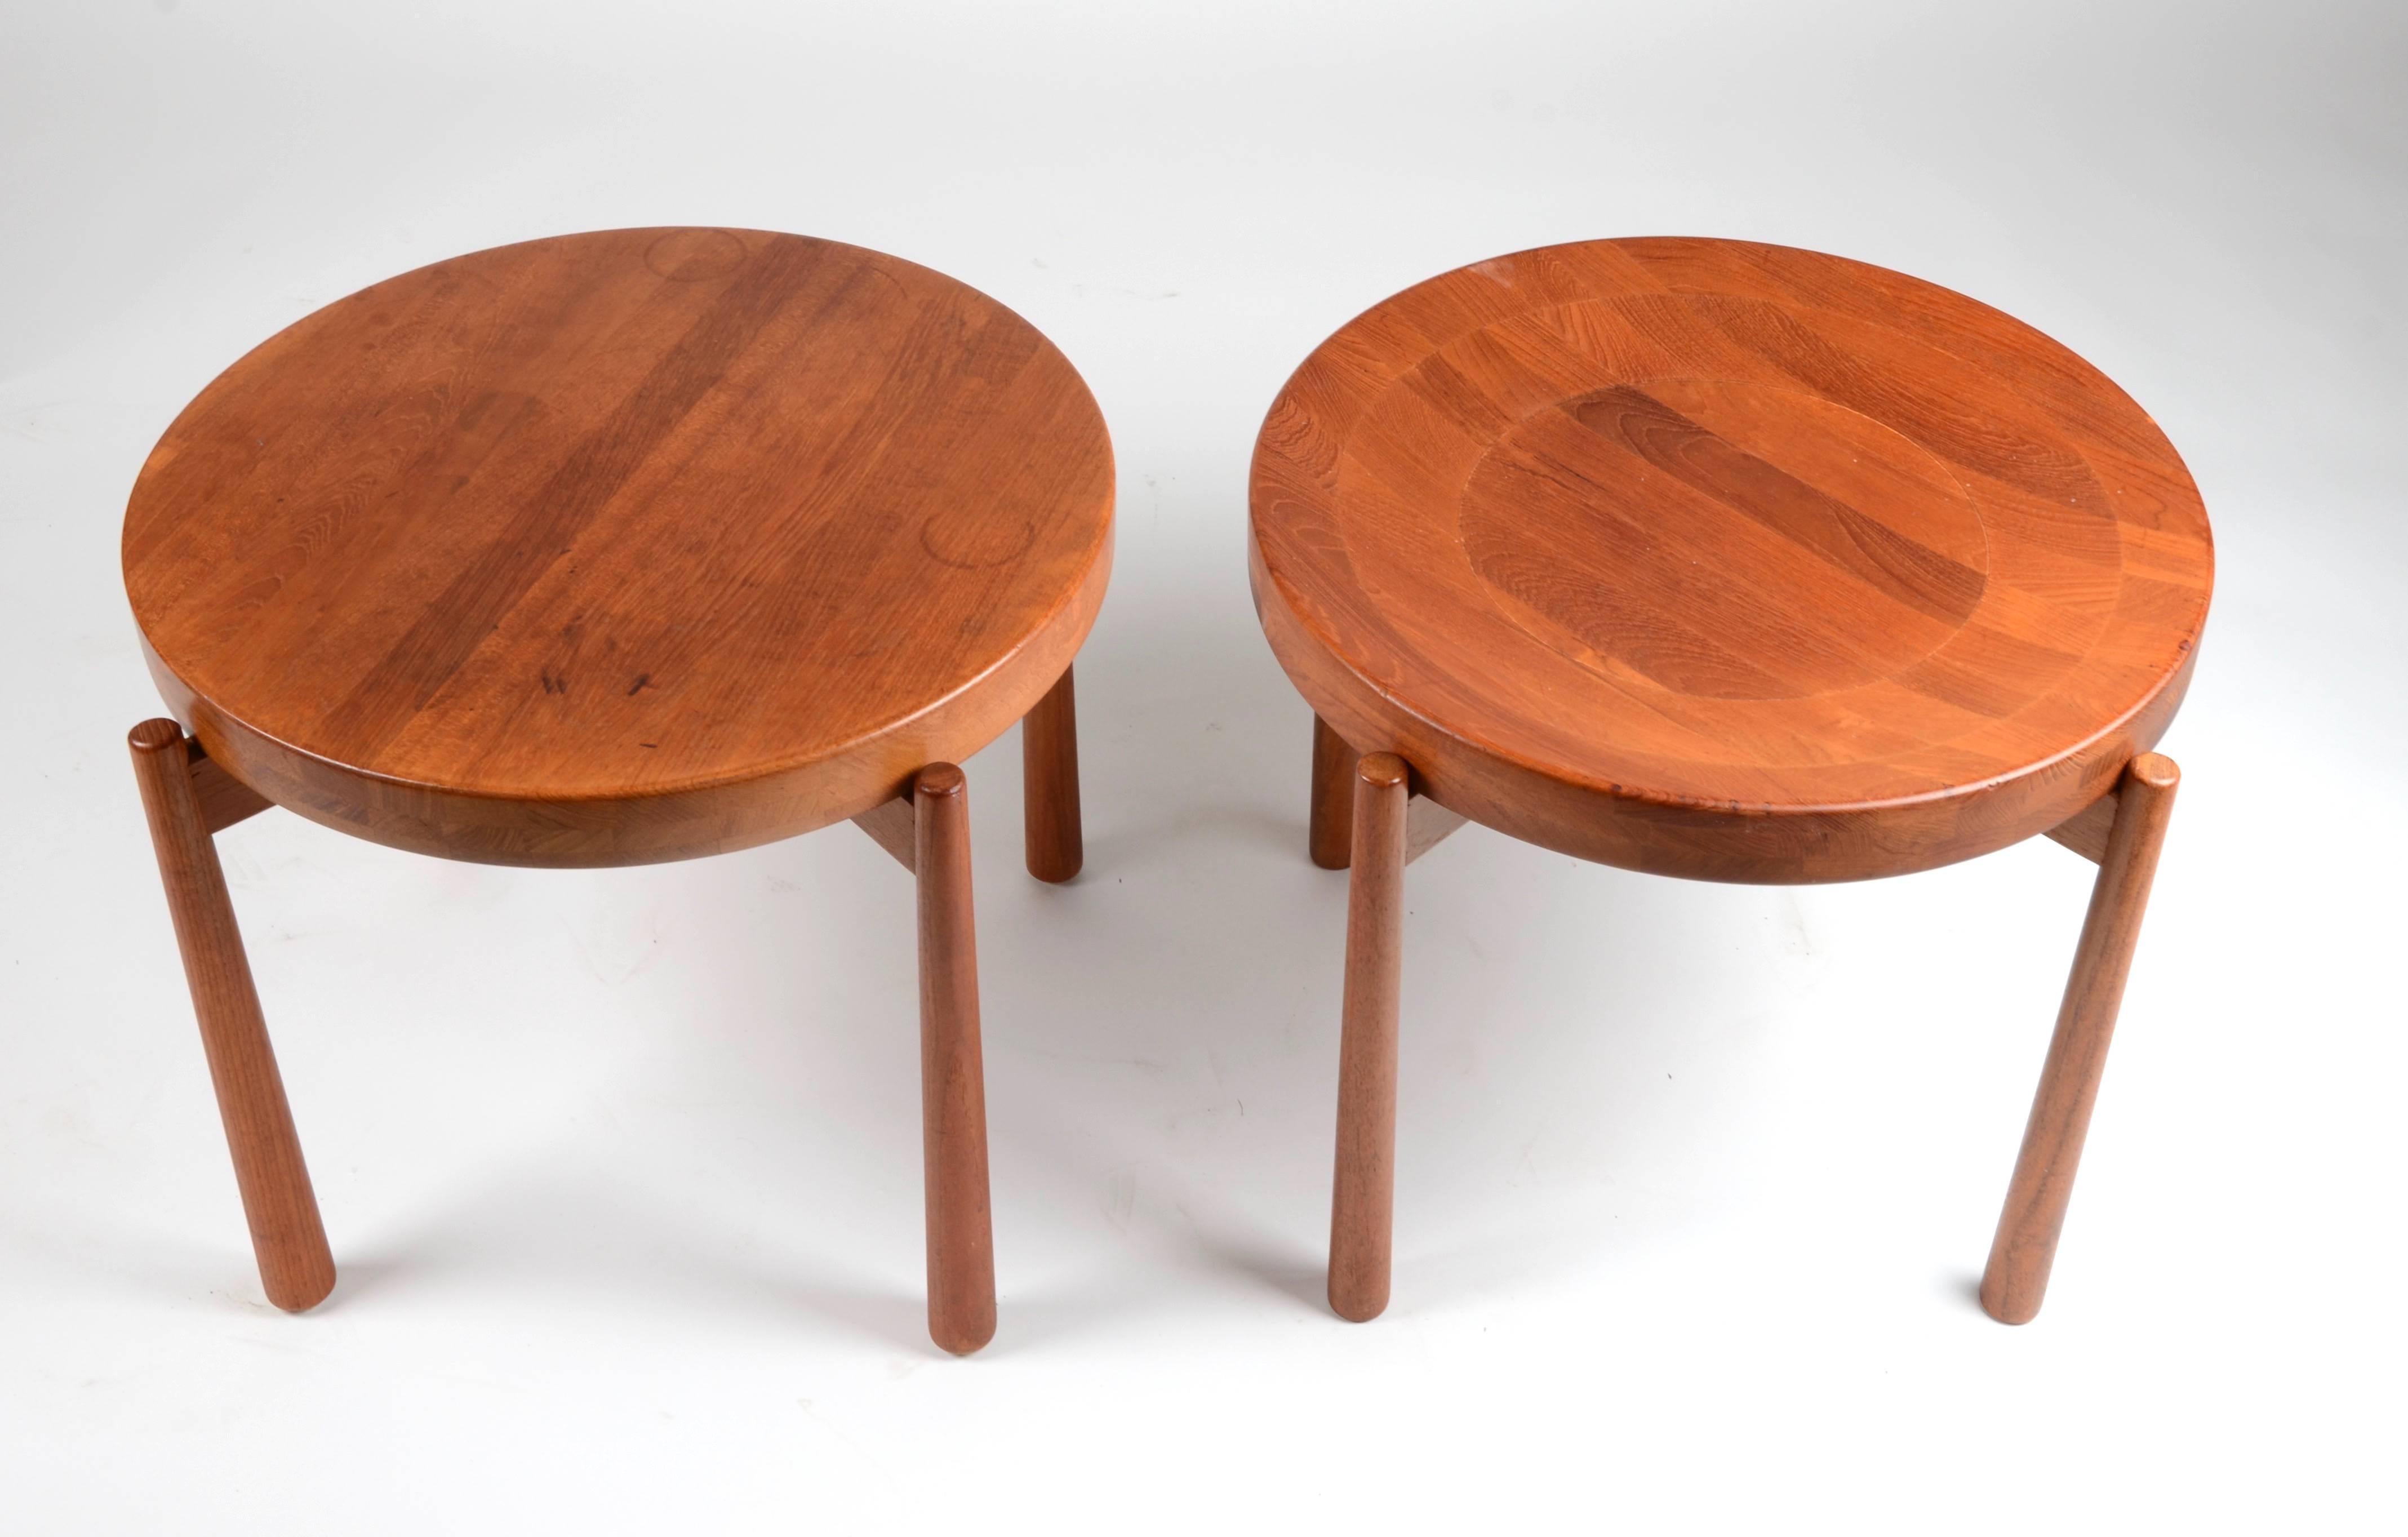 Teak Pair of Tray Tables, in the Style of Jens Quistgaard, Denmark, Mid-1900s For Sale